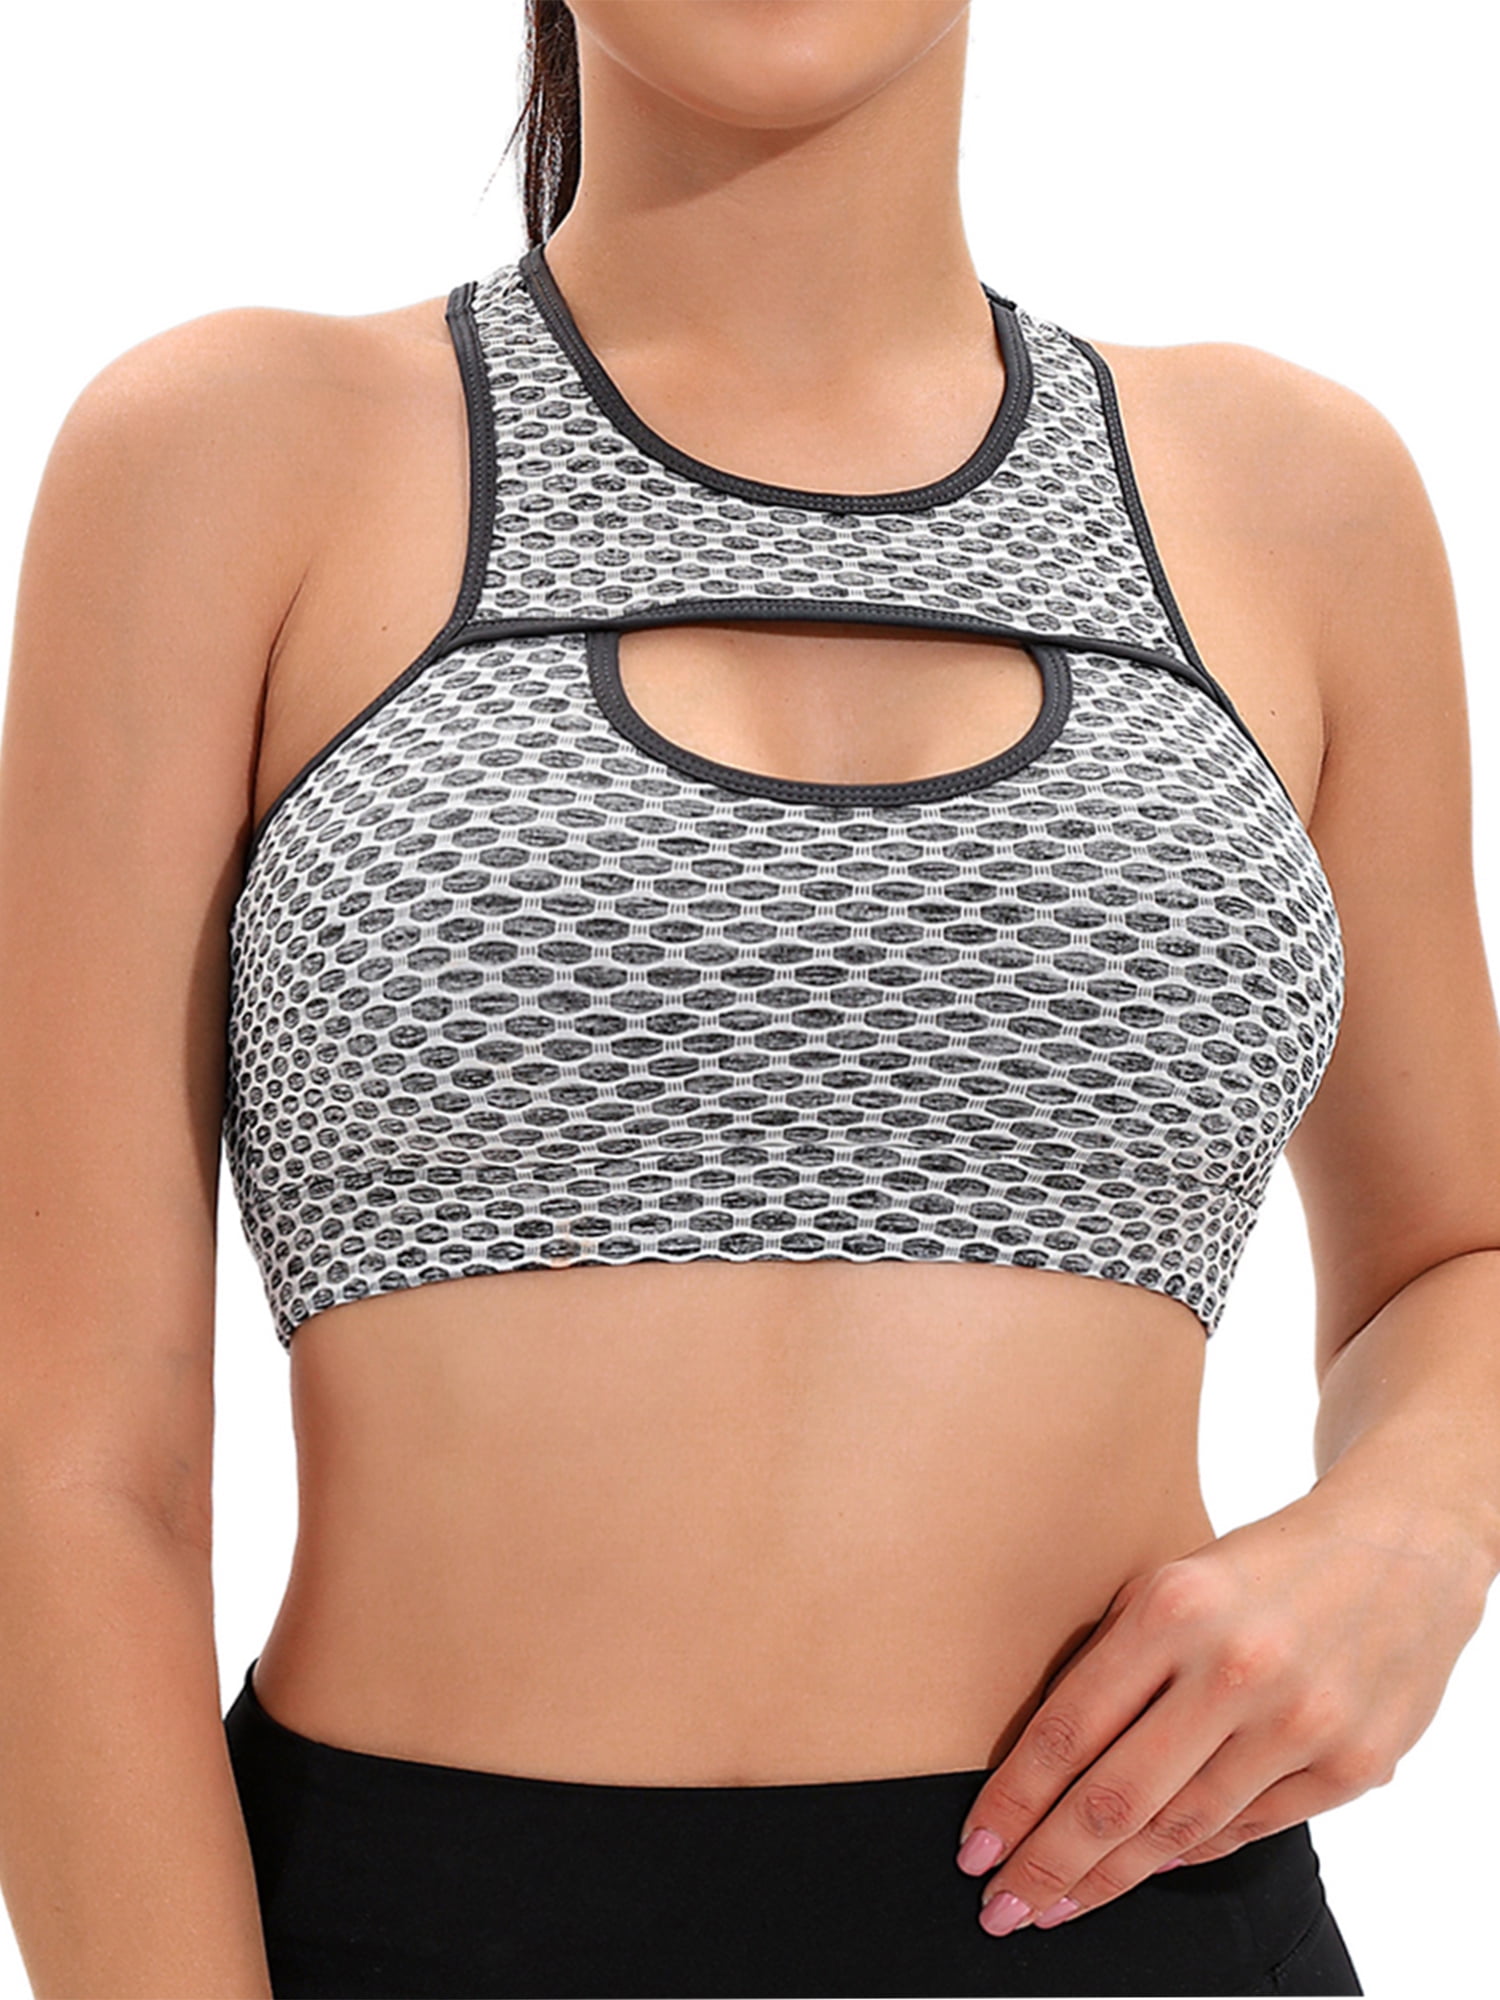 YouLoveIt Women Lace Sport Bras Breathable Sports Bra Sport Fitness Vest  Lace Bra Yoga Running Fitness Workout Stretch Fitness Gym Lace Crop Top  Sleep Bra 